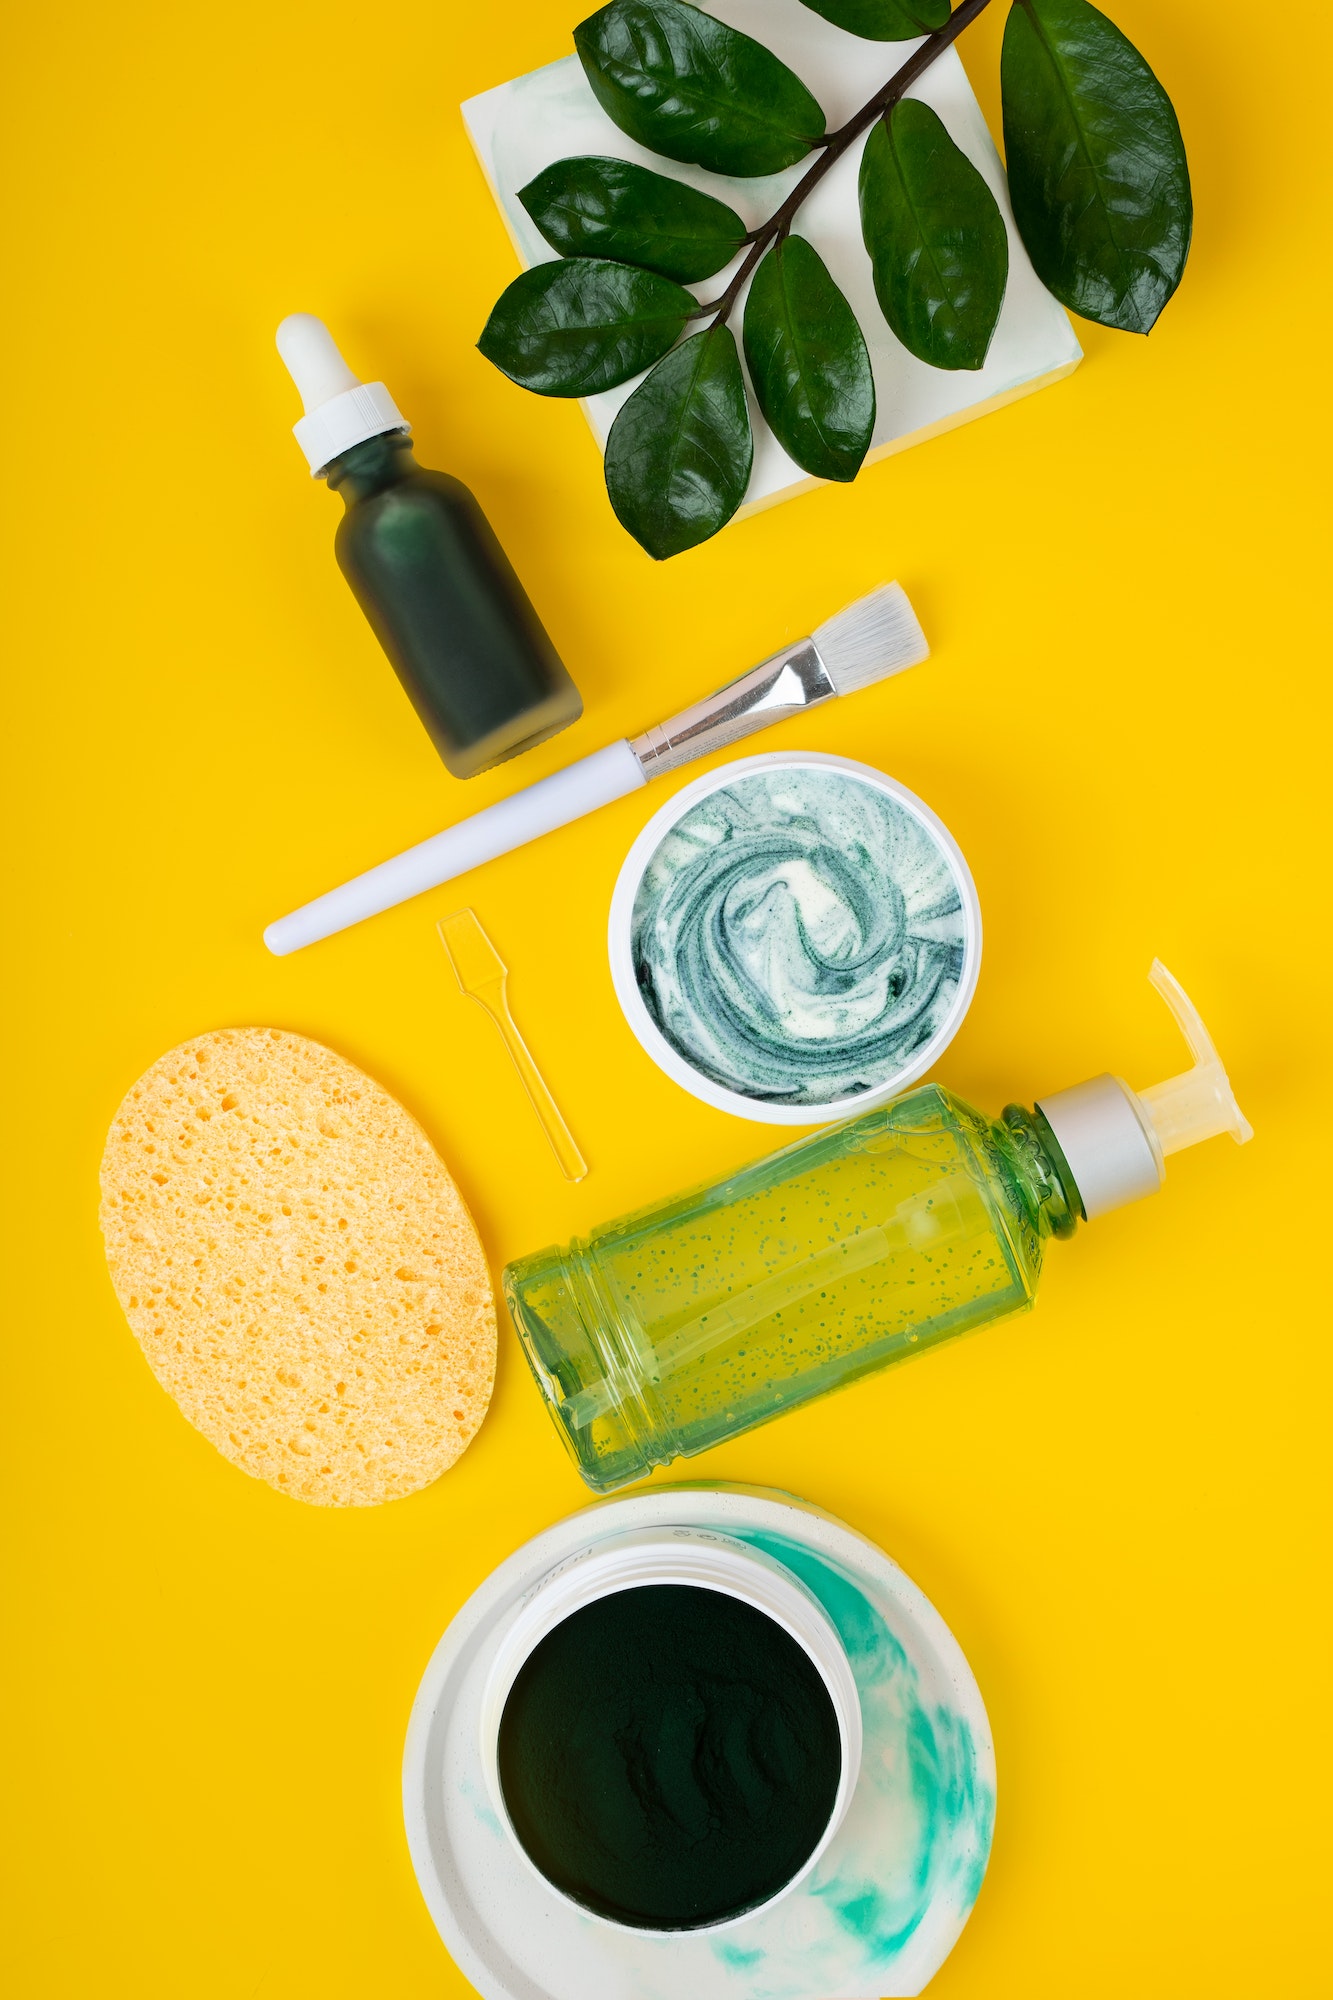 Green Spirulina DIY facial cleansing mask and ingredients. pa, beauty cosmetics and body care.